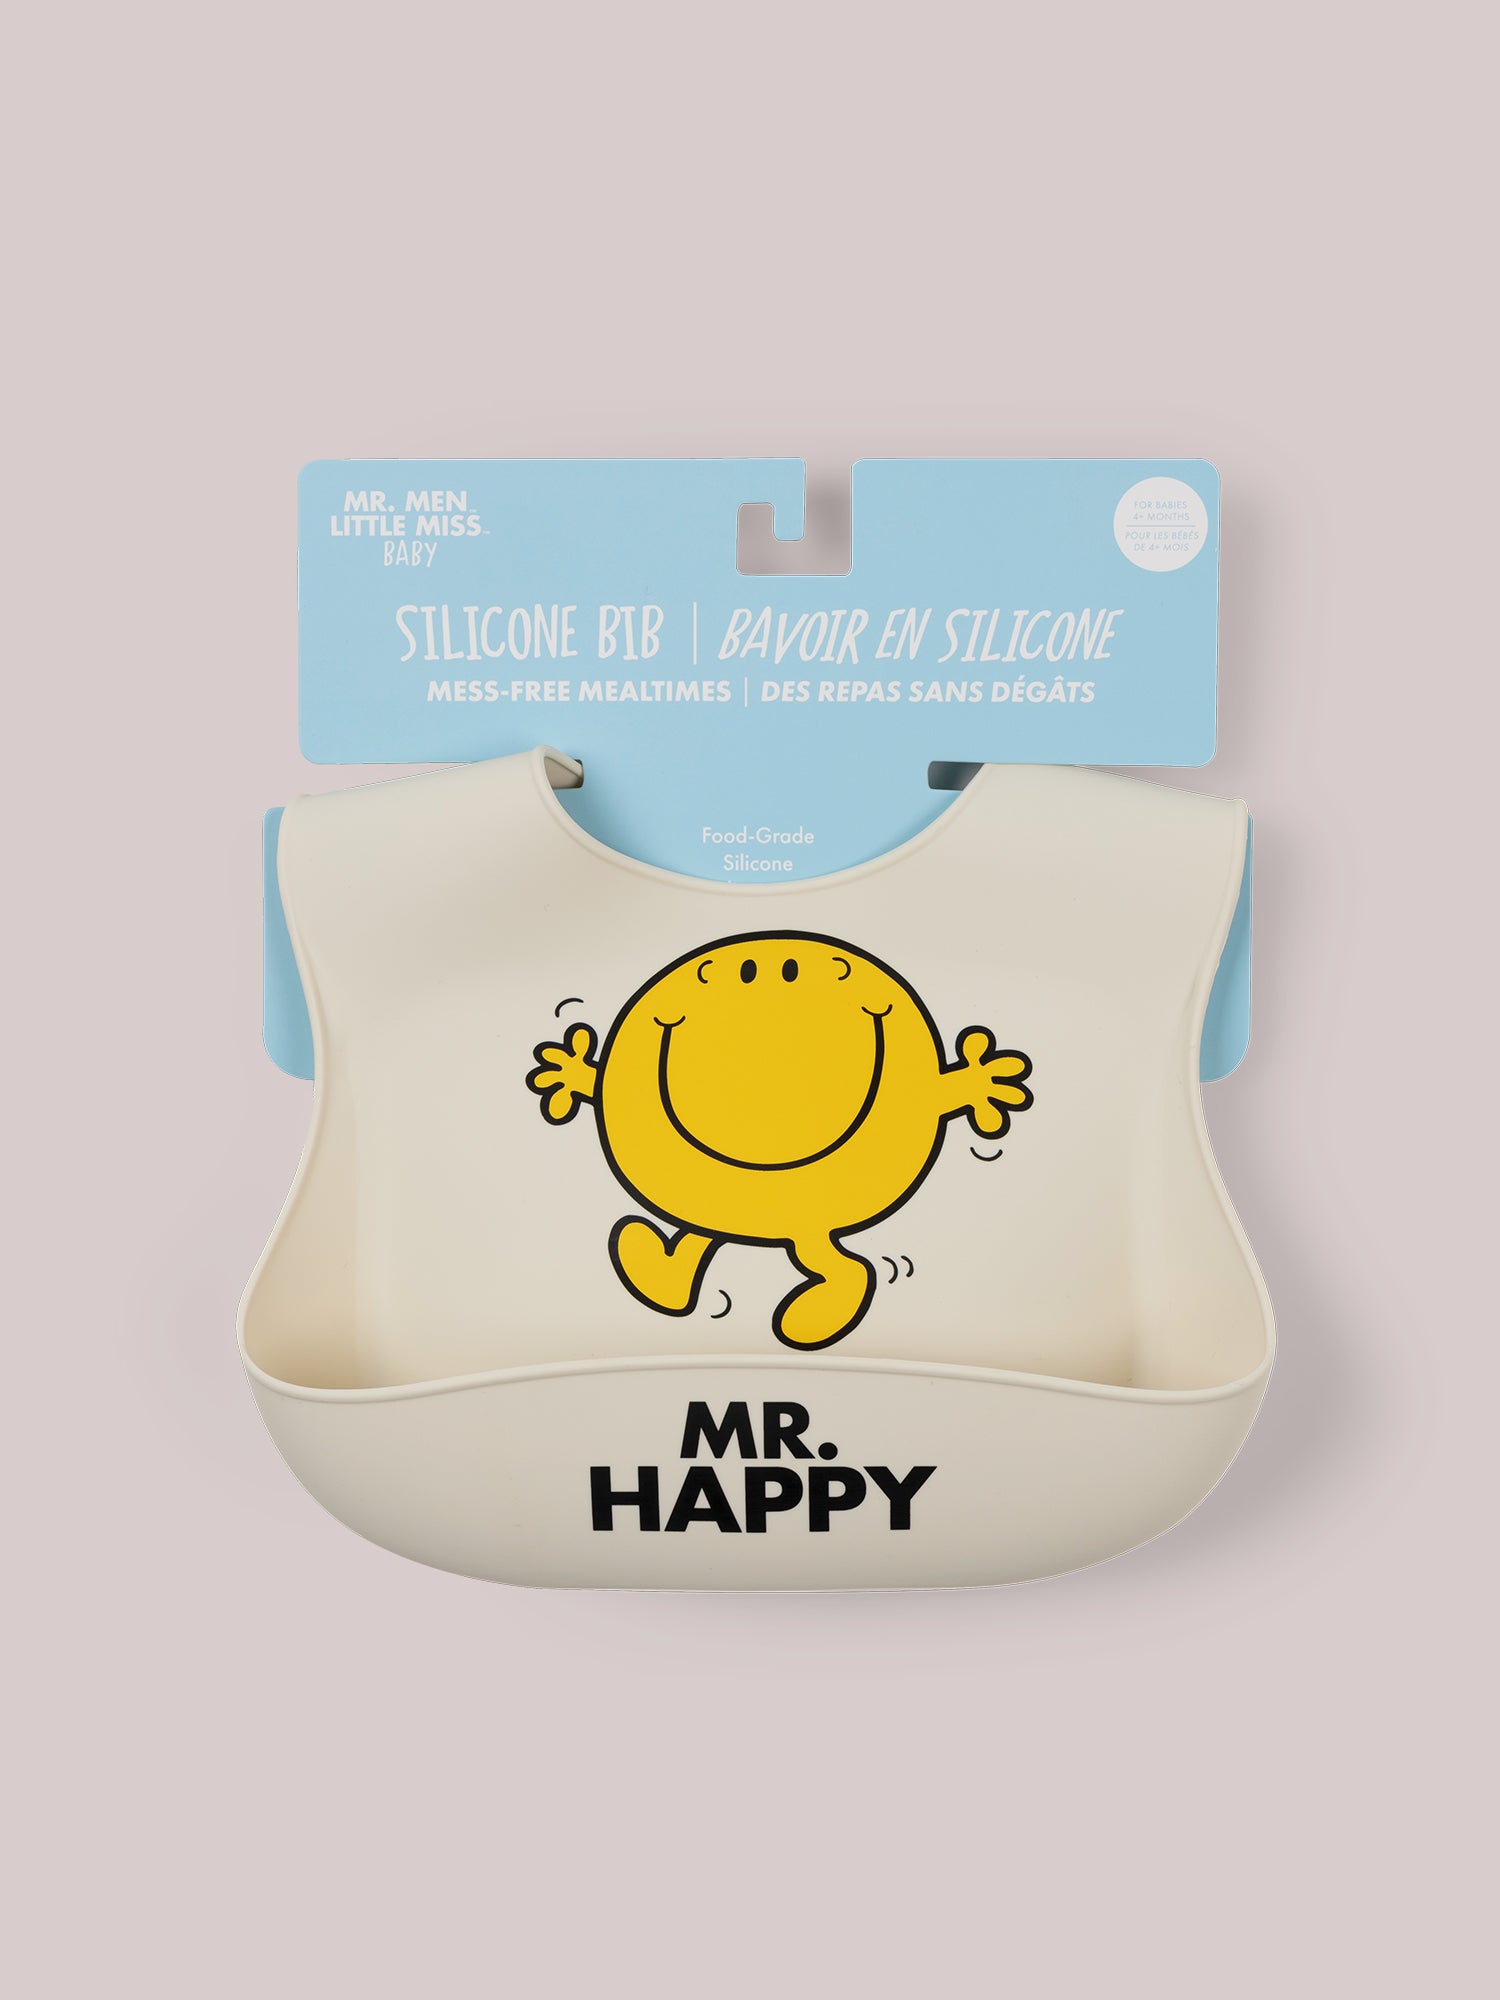 Mr. Happy silicone bib attached to hang tag